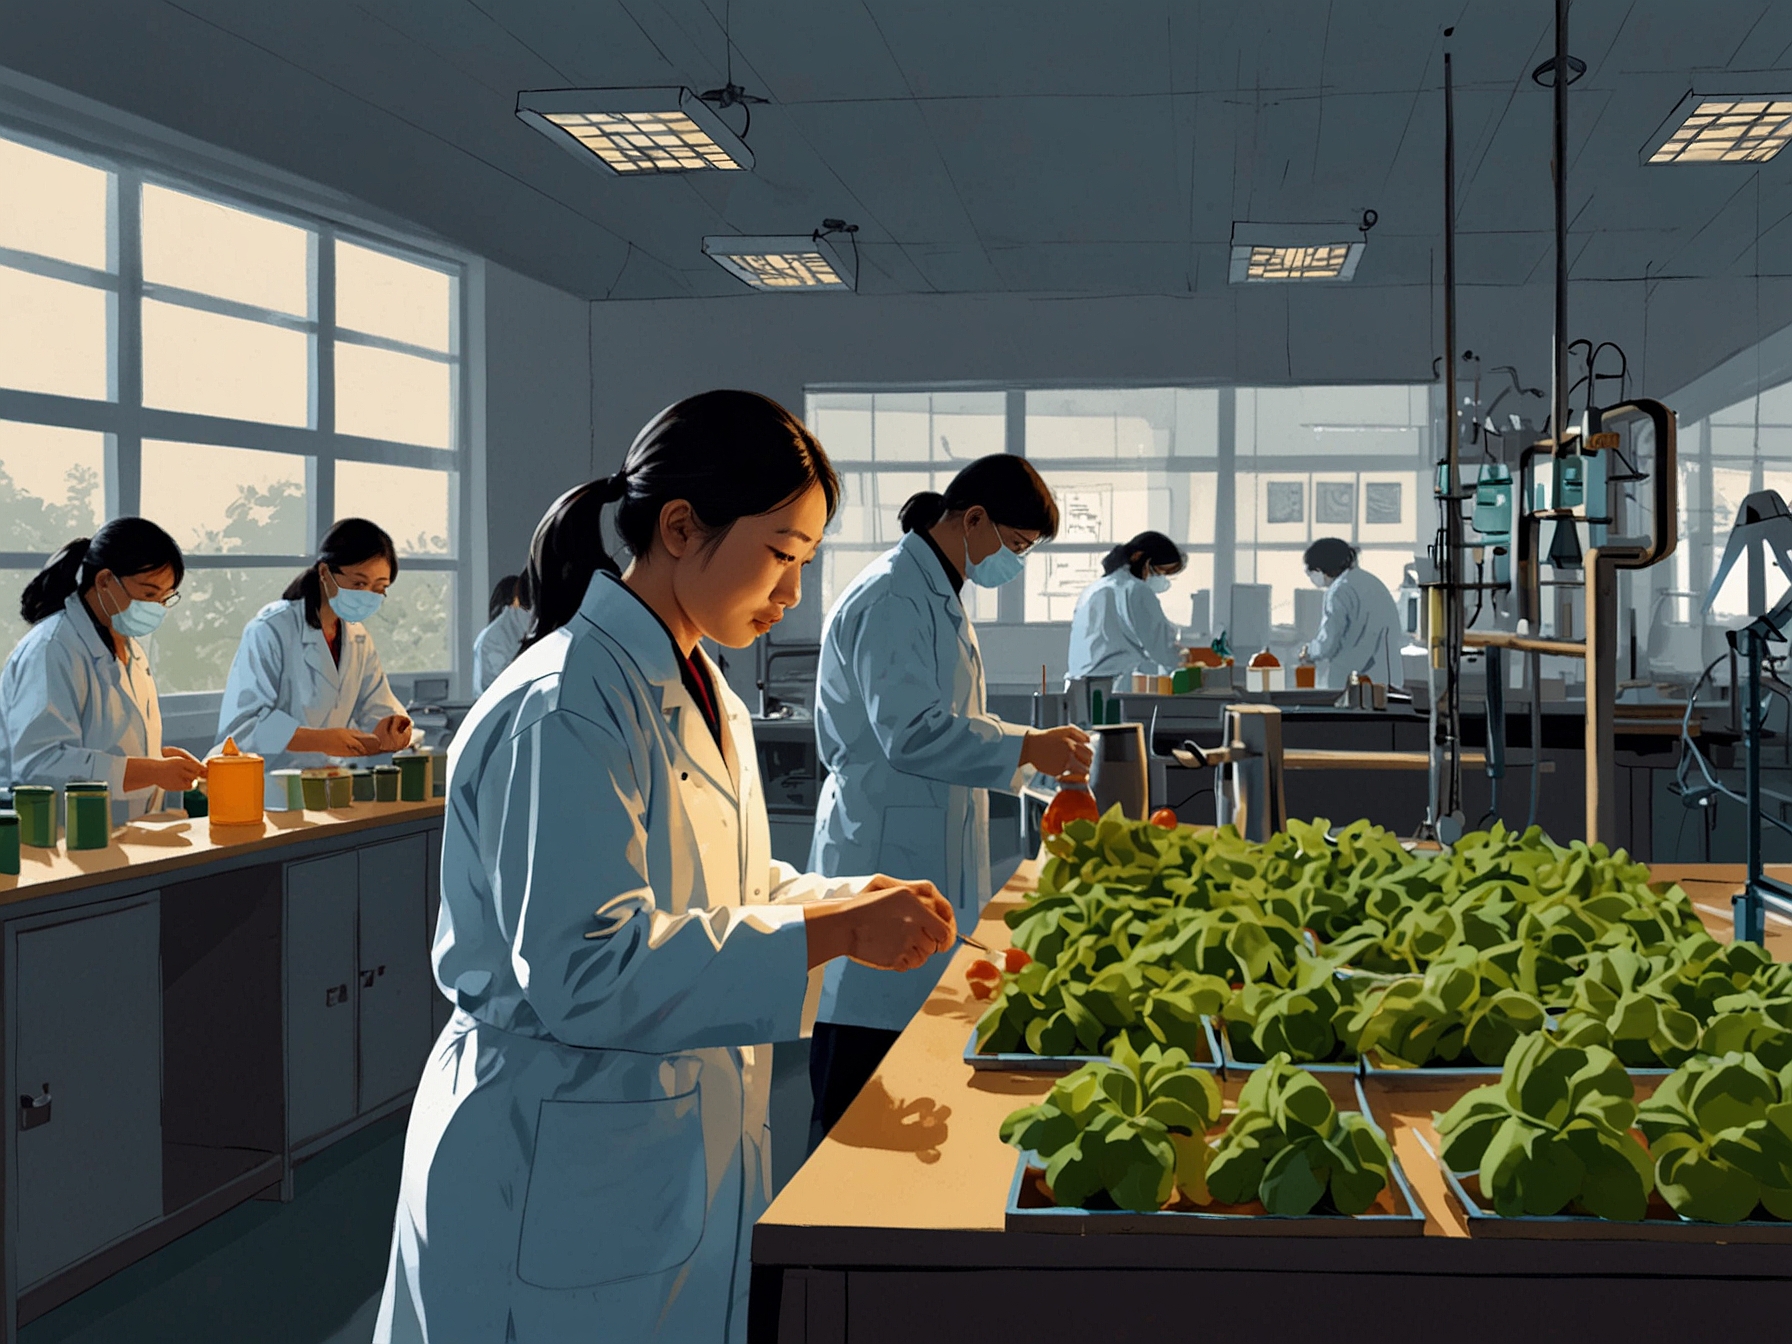 An image showcasing advanced Chinese laboratories with researchers working on genetic modification and molecular breeding of crops, highlighting China's achievements in plant biology and food security.